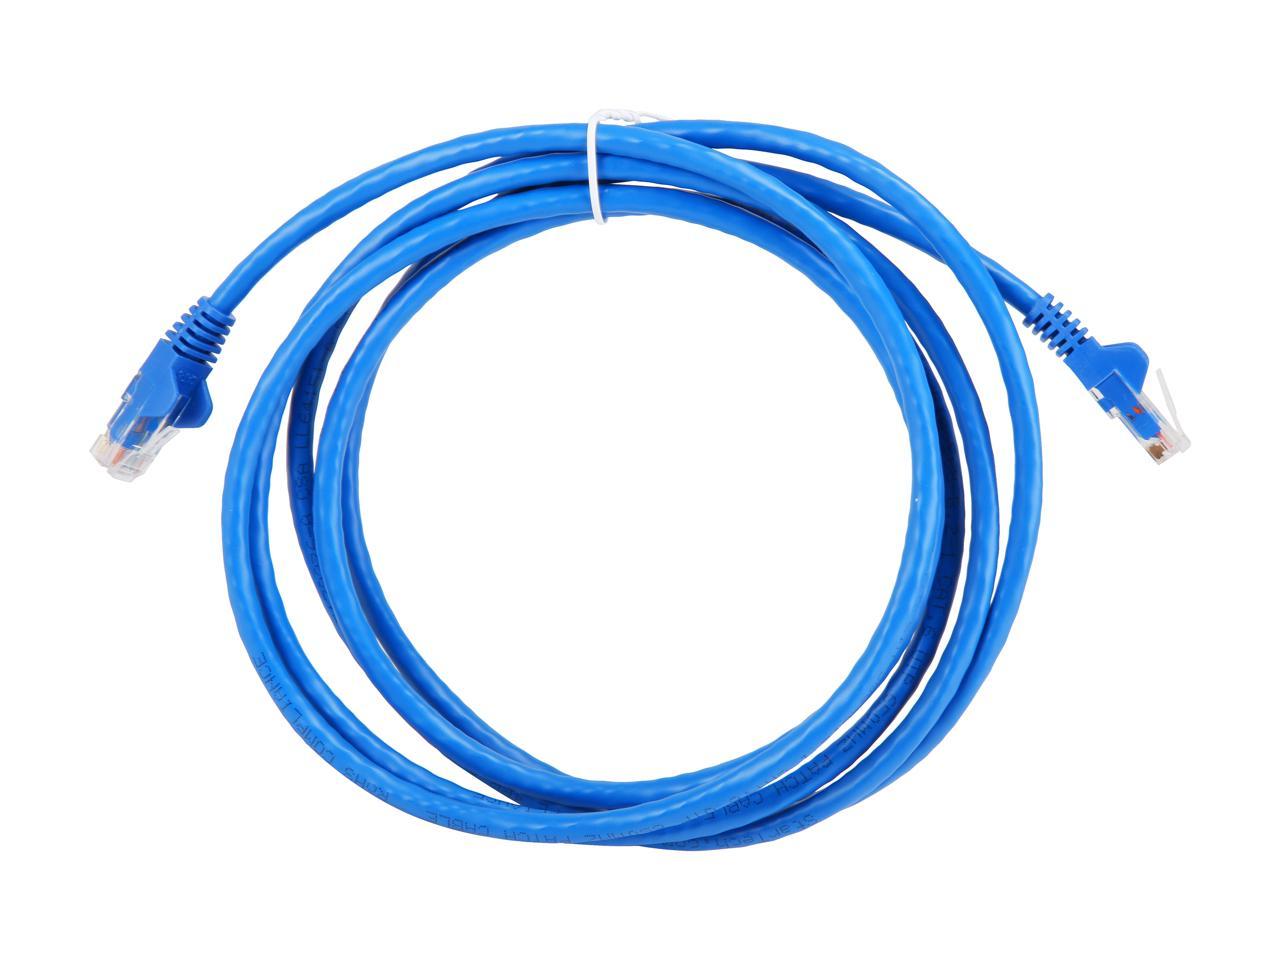 StarTech N6PATCH8BL StarTech.com Cat6 Patch Cable - 8 ft. - Blue Ethernet Cable - Snagless RJ45 Cable - Ethernet Cord - Cat 6 Cable - 8 ft.